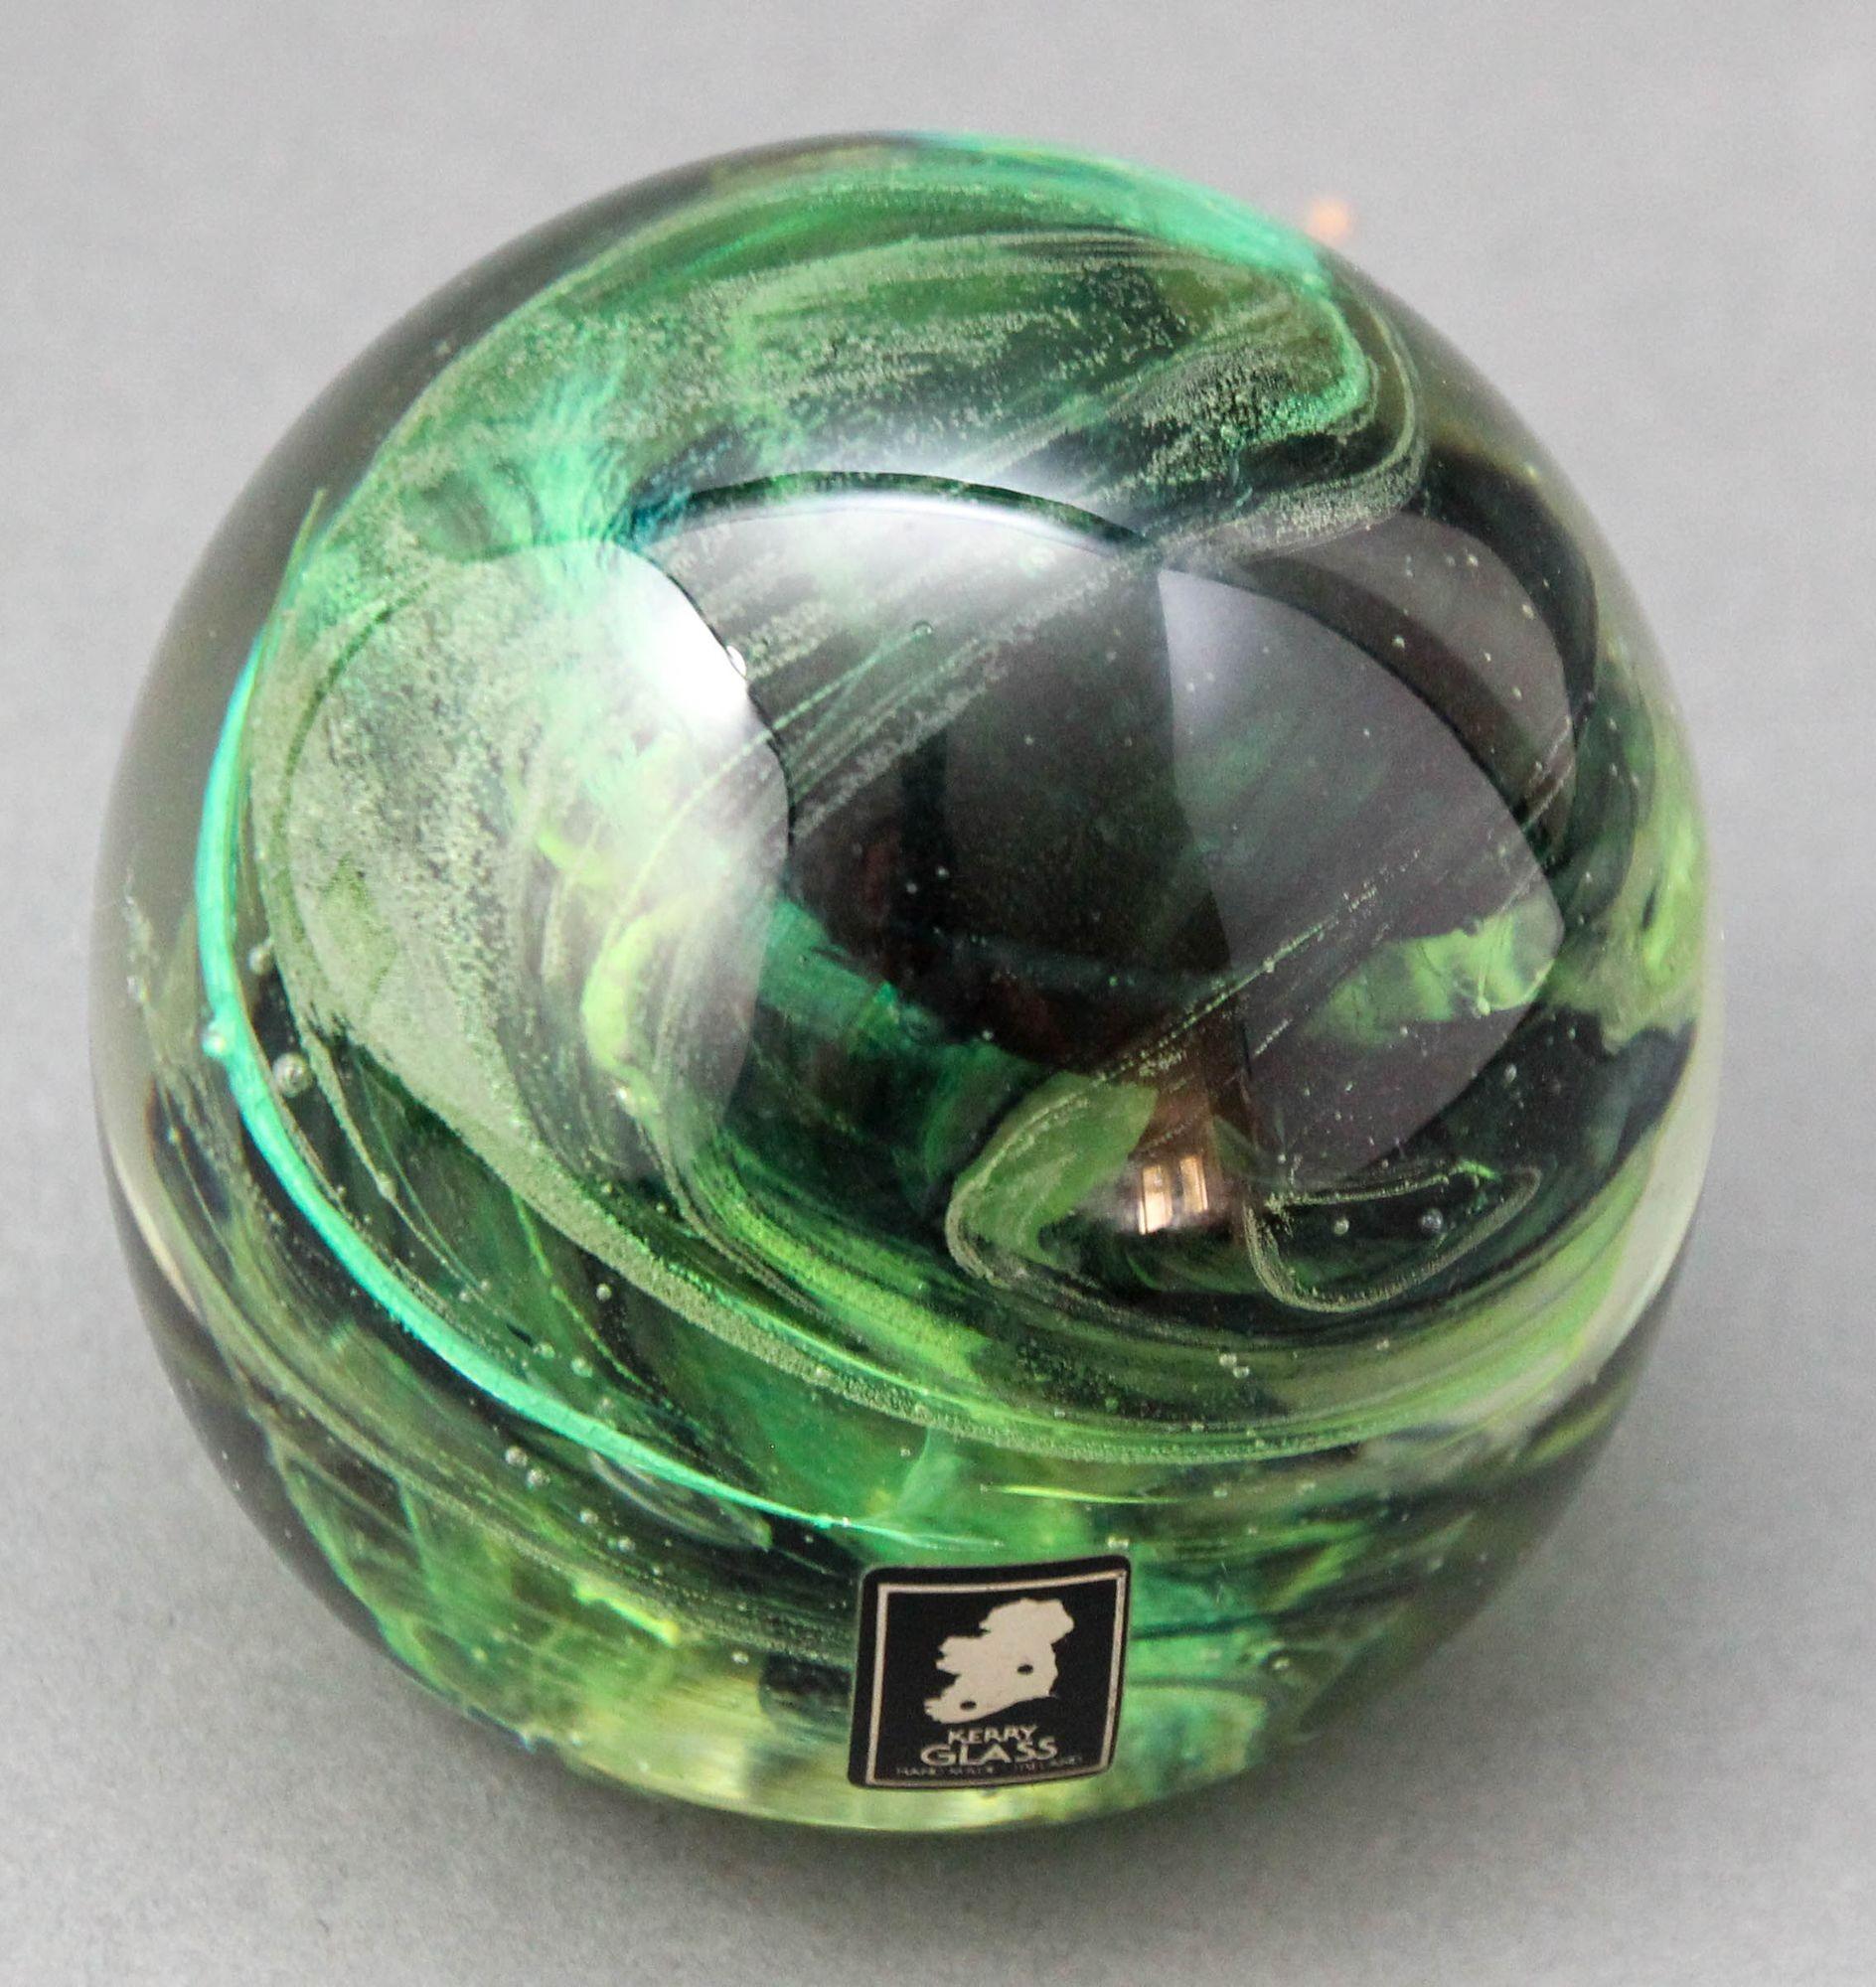 KERRY Irish Art Glass Paperweight Hand Blown in a Jade to Emerald Green 1980s For Sale 8